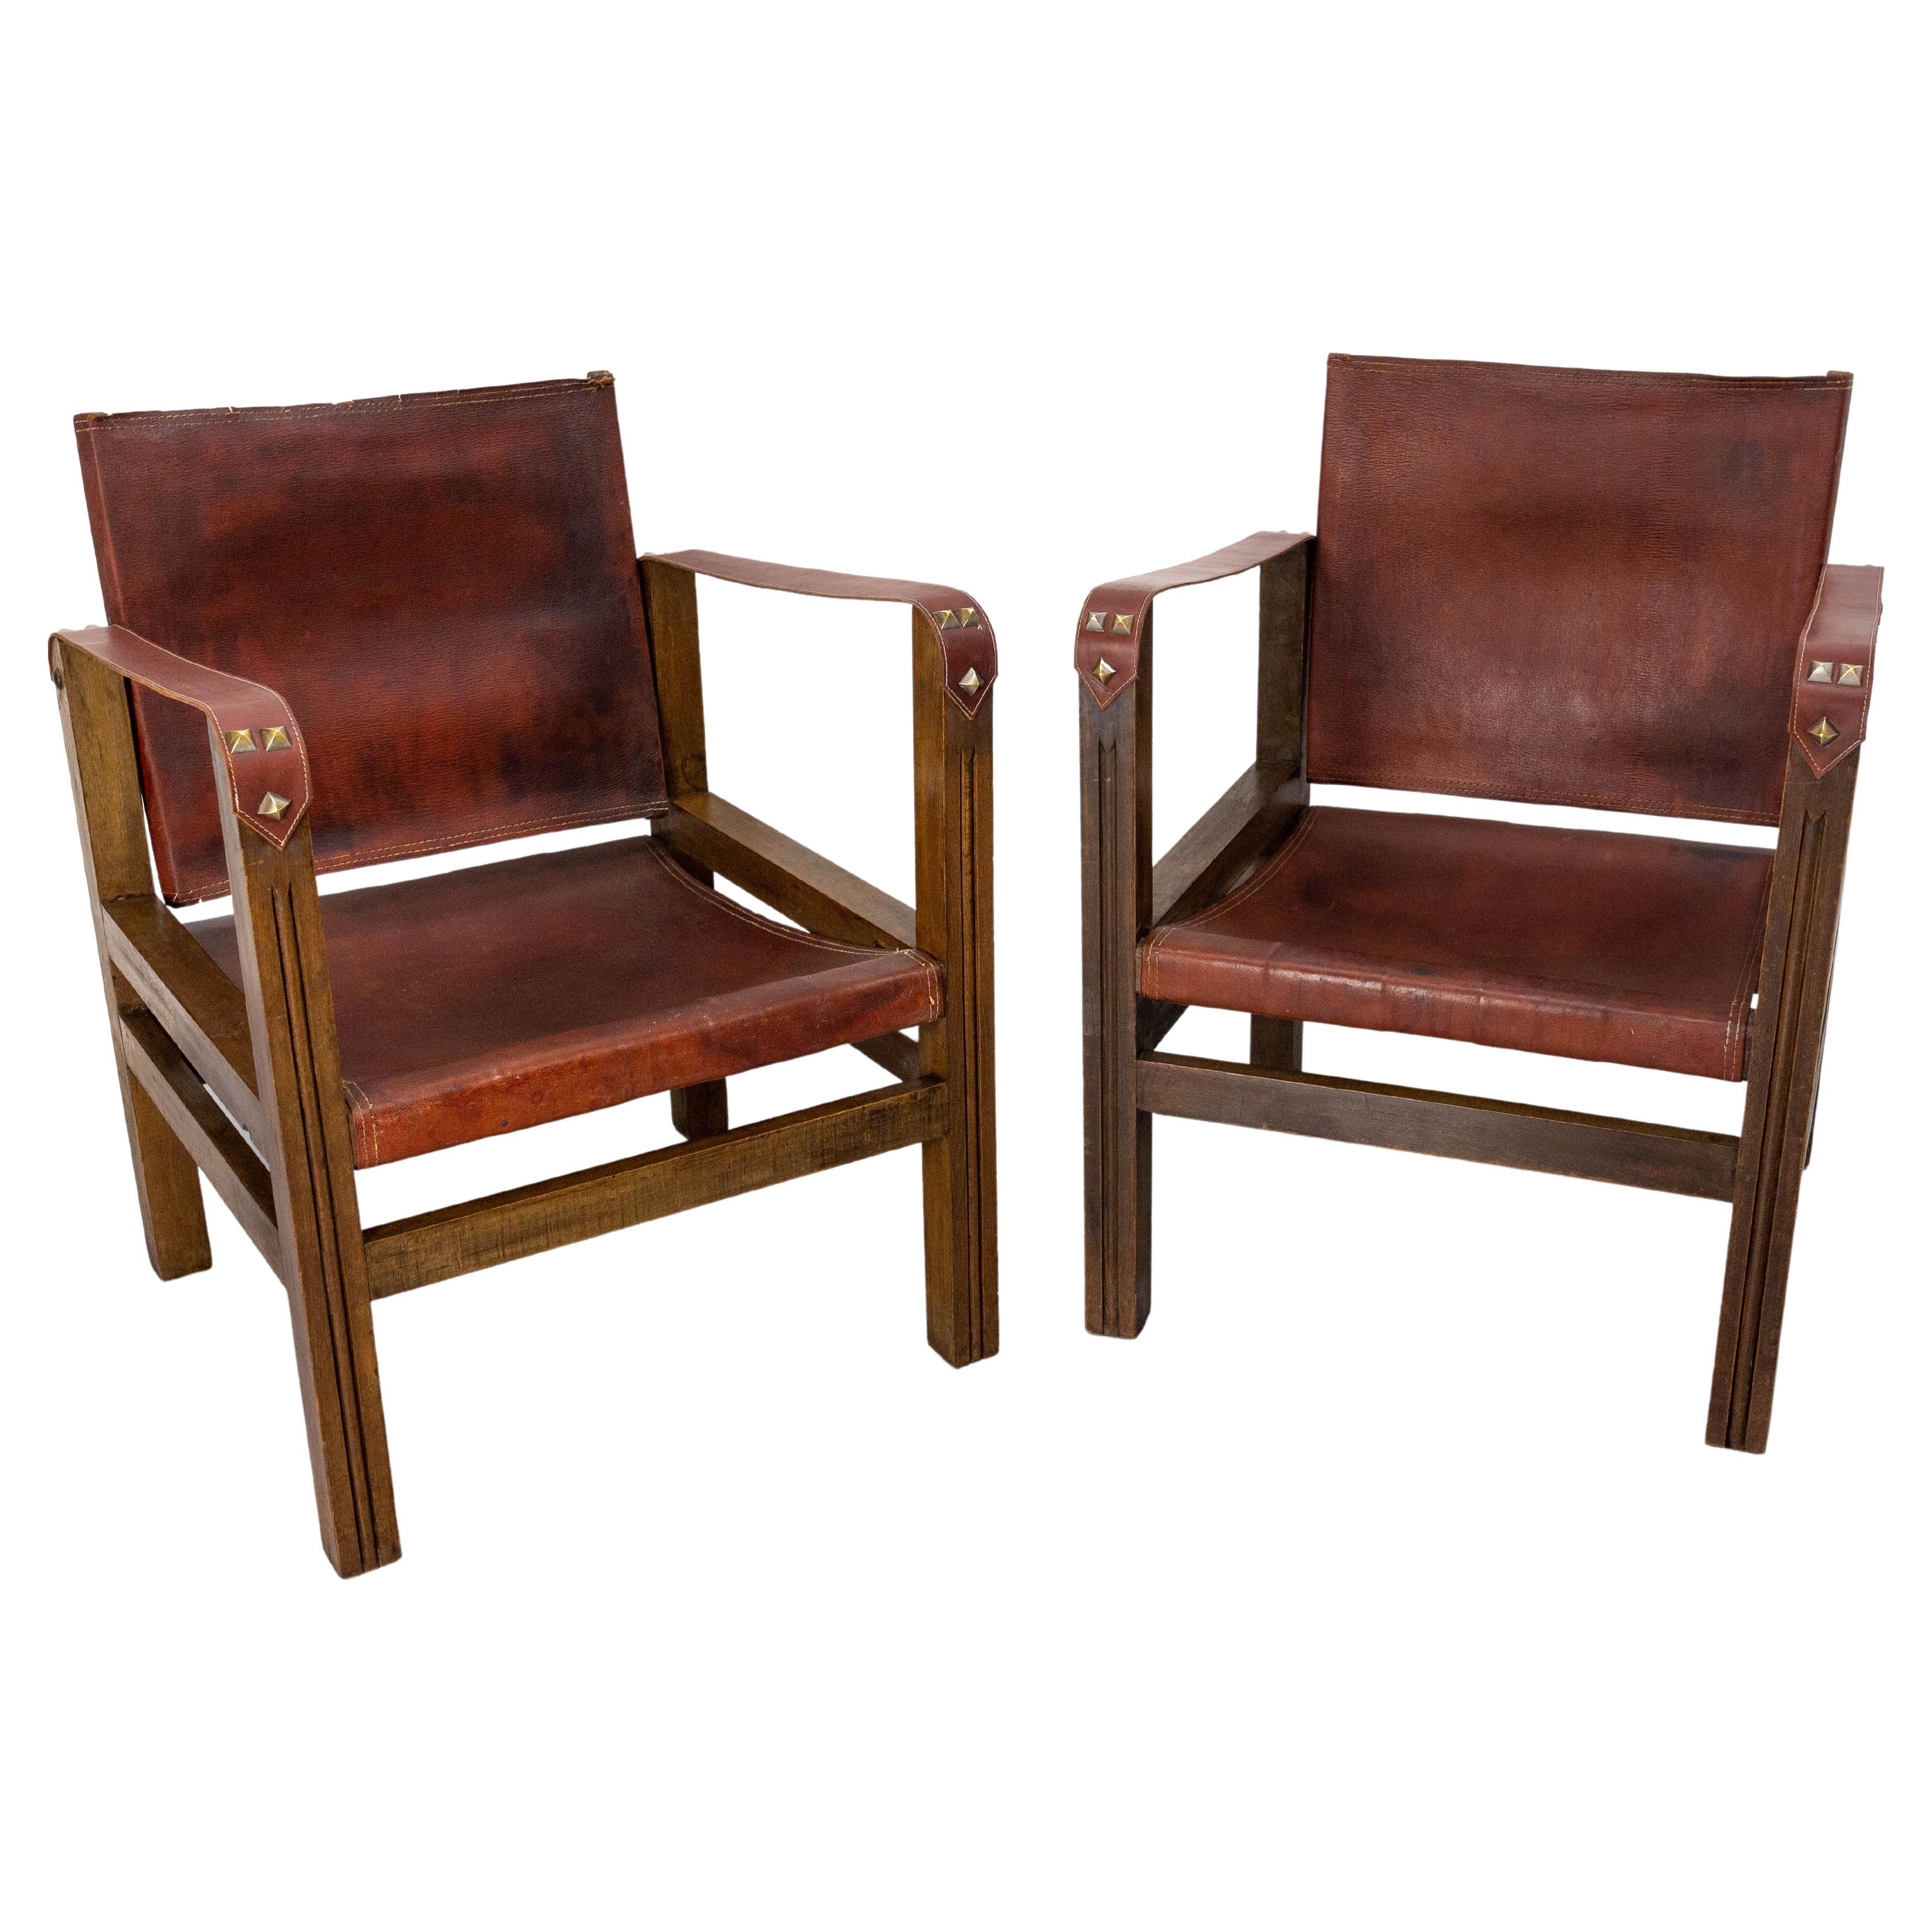 Pair of Fauteuils Open Armchairs French Leather and Beech Safari Style, C. 1940 For Sale